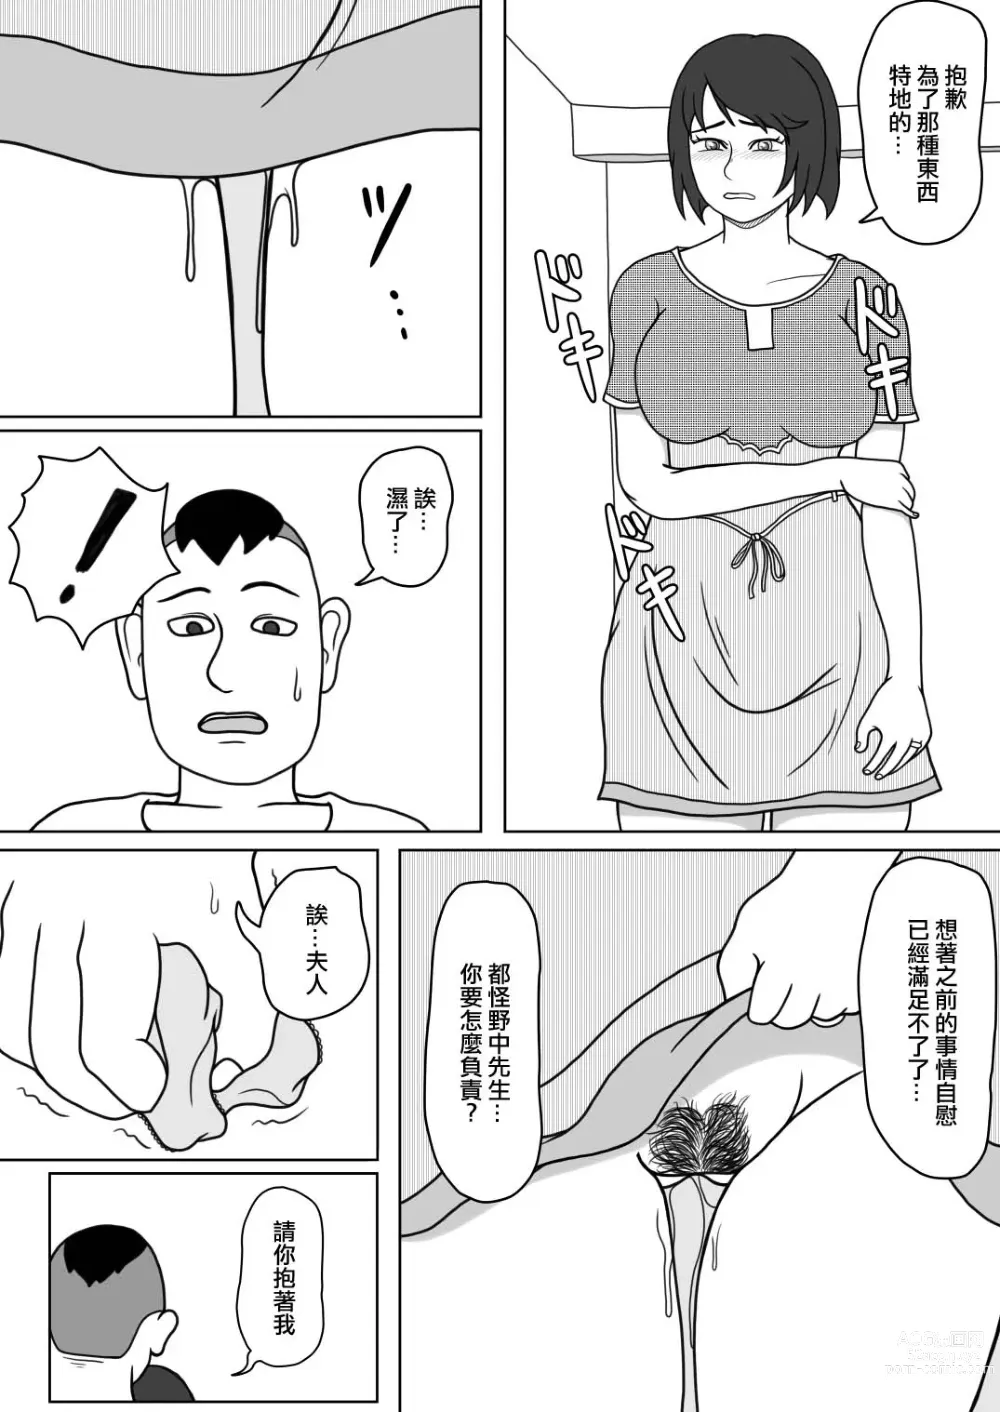 Page 20 of doujinshi 201號房的鄰居